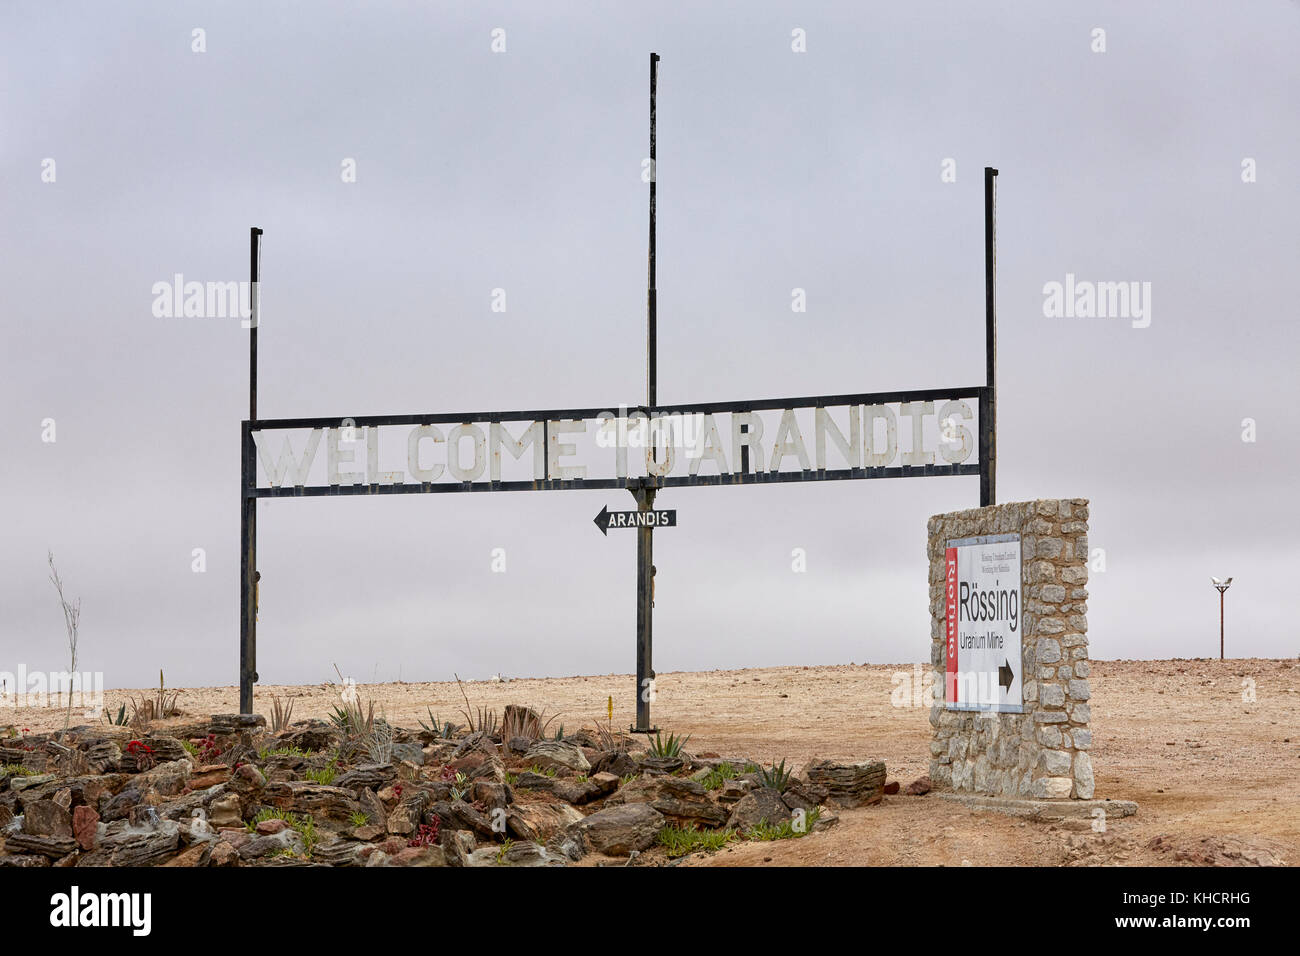 Welcome to Arandis and Rio Tinto Rossing Uranium Mine signs in Namib Desert near Arandis, Namibia, Africa Stock Photo